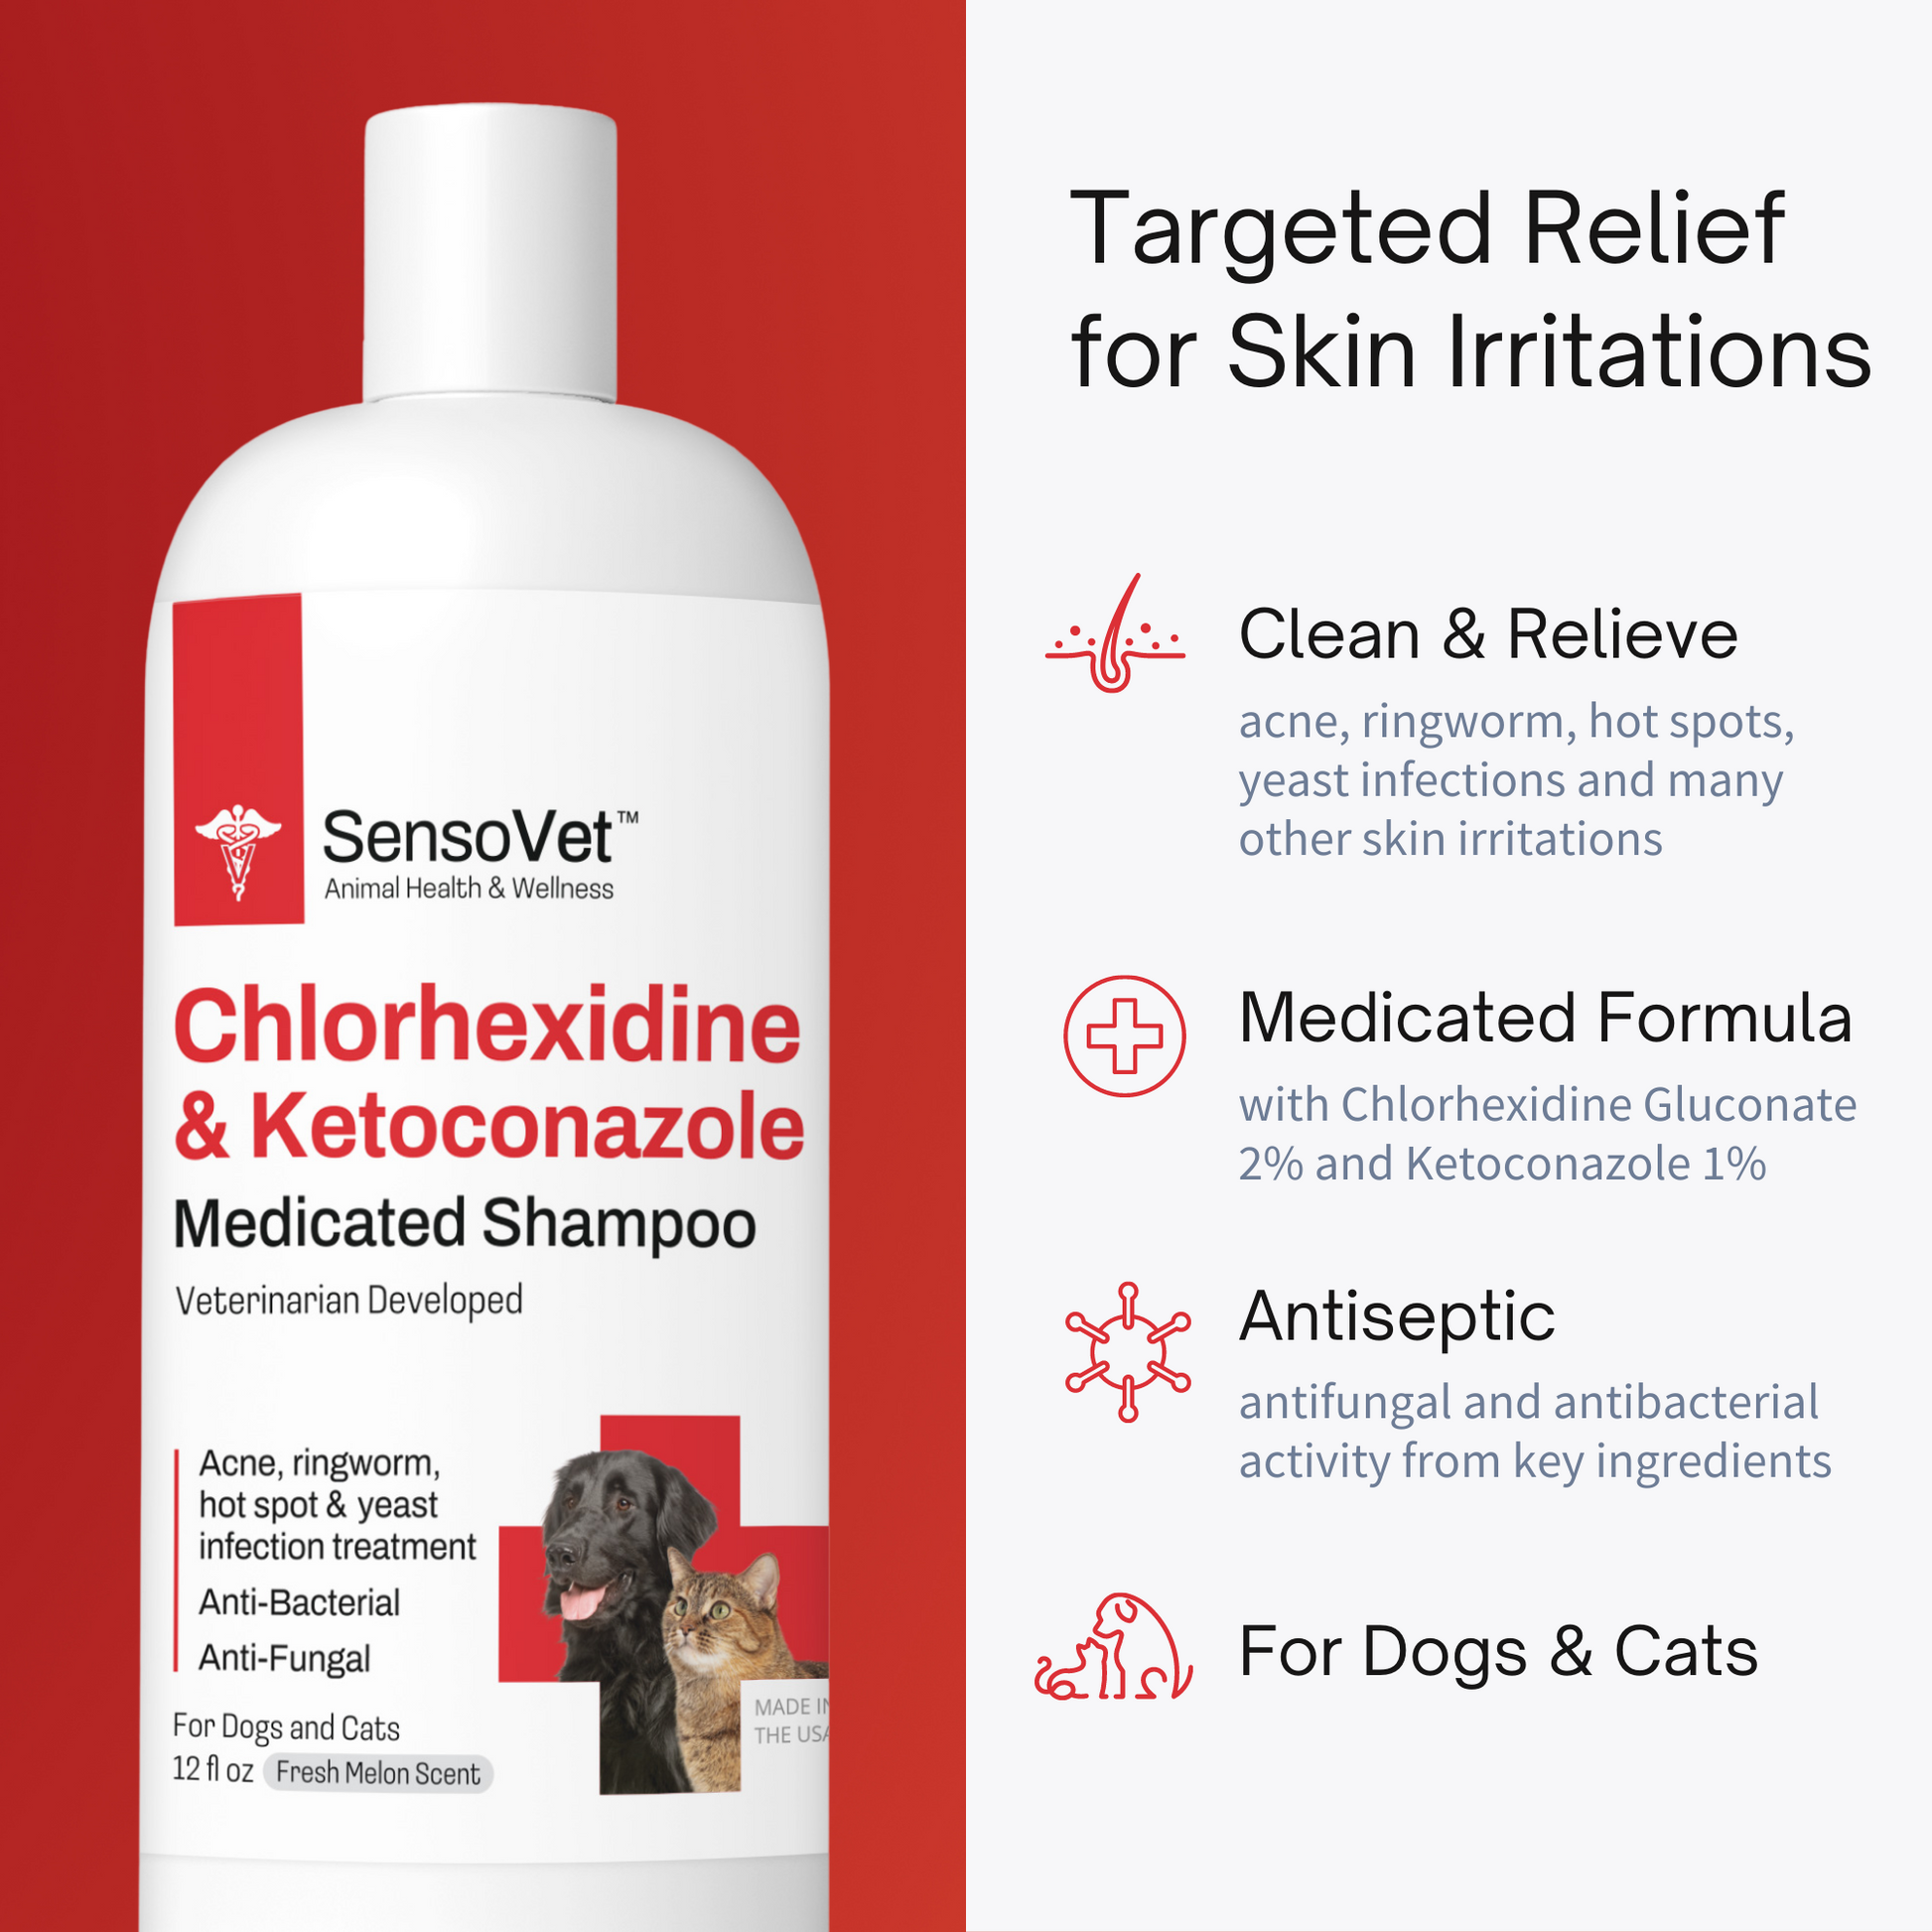 Clean and relieve acne, ringworm, hot spots, yeast infections and many other skin irritations for dog and cats